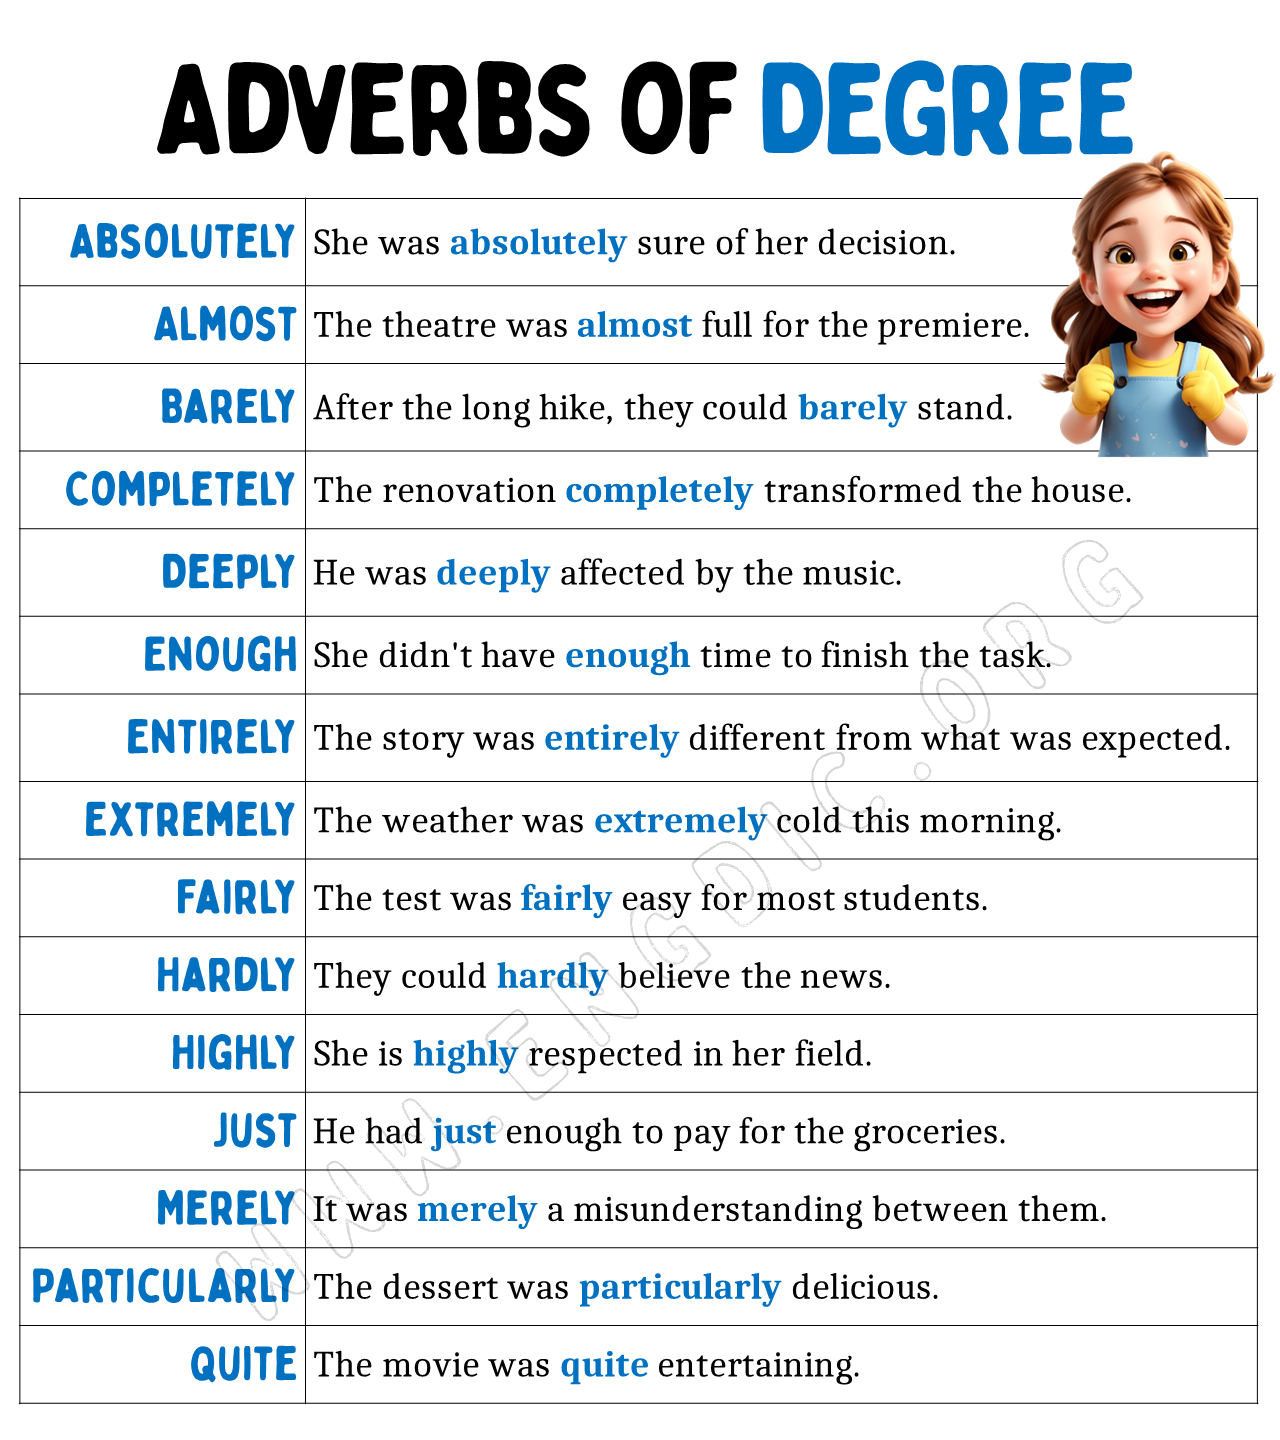 Adverbs of Degree